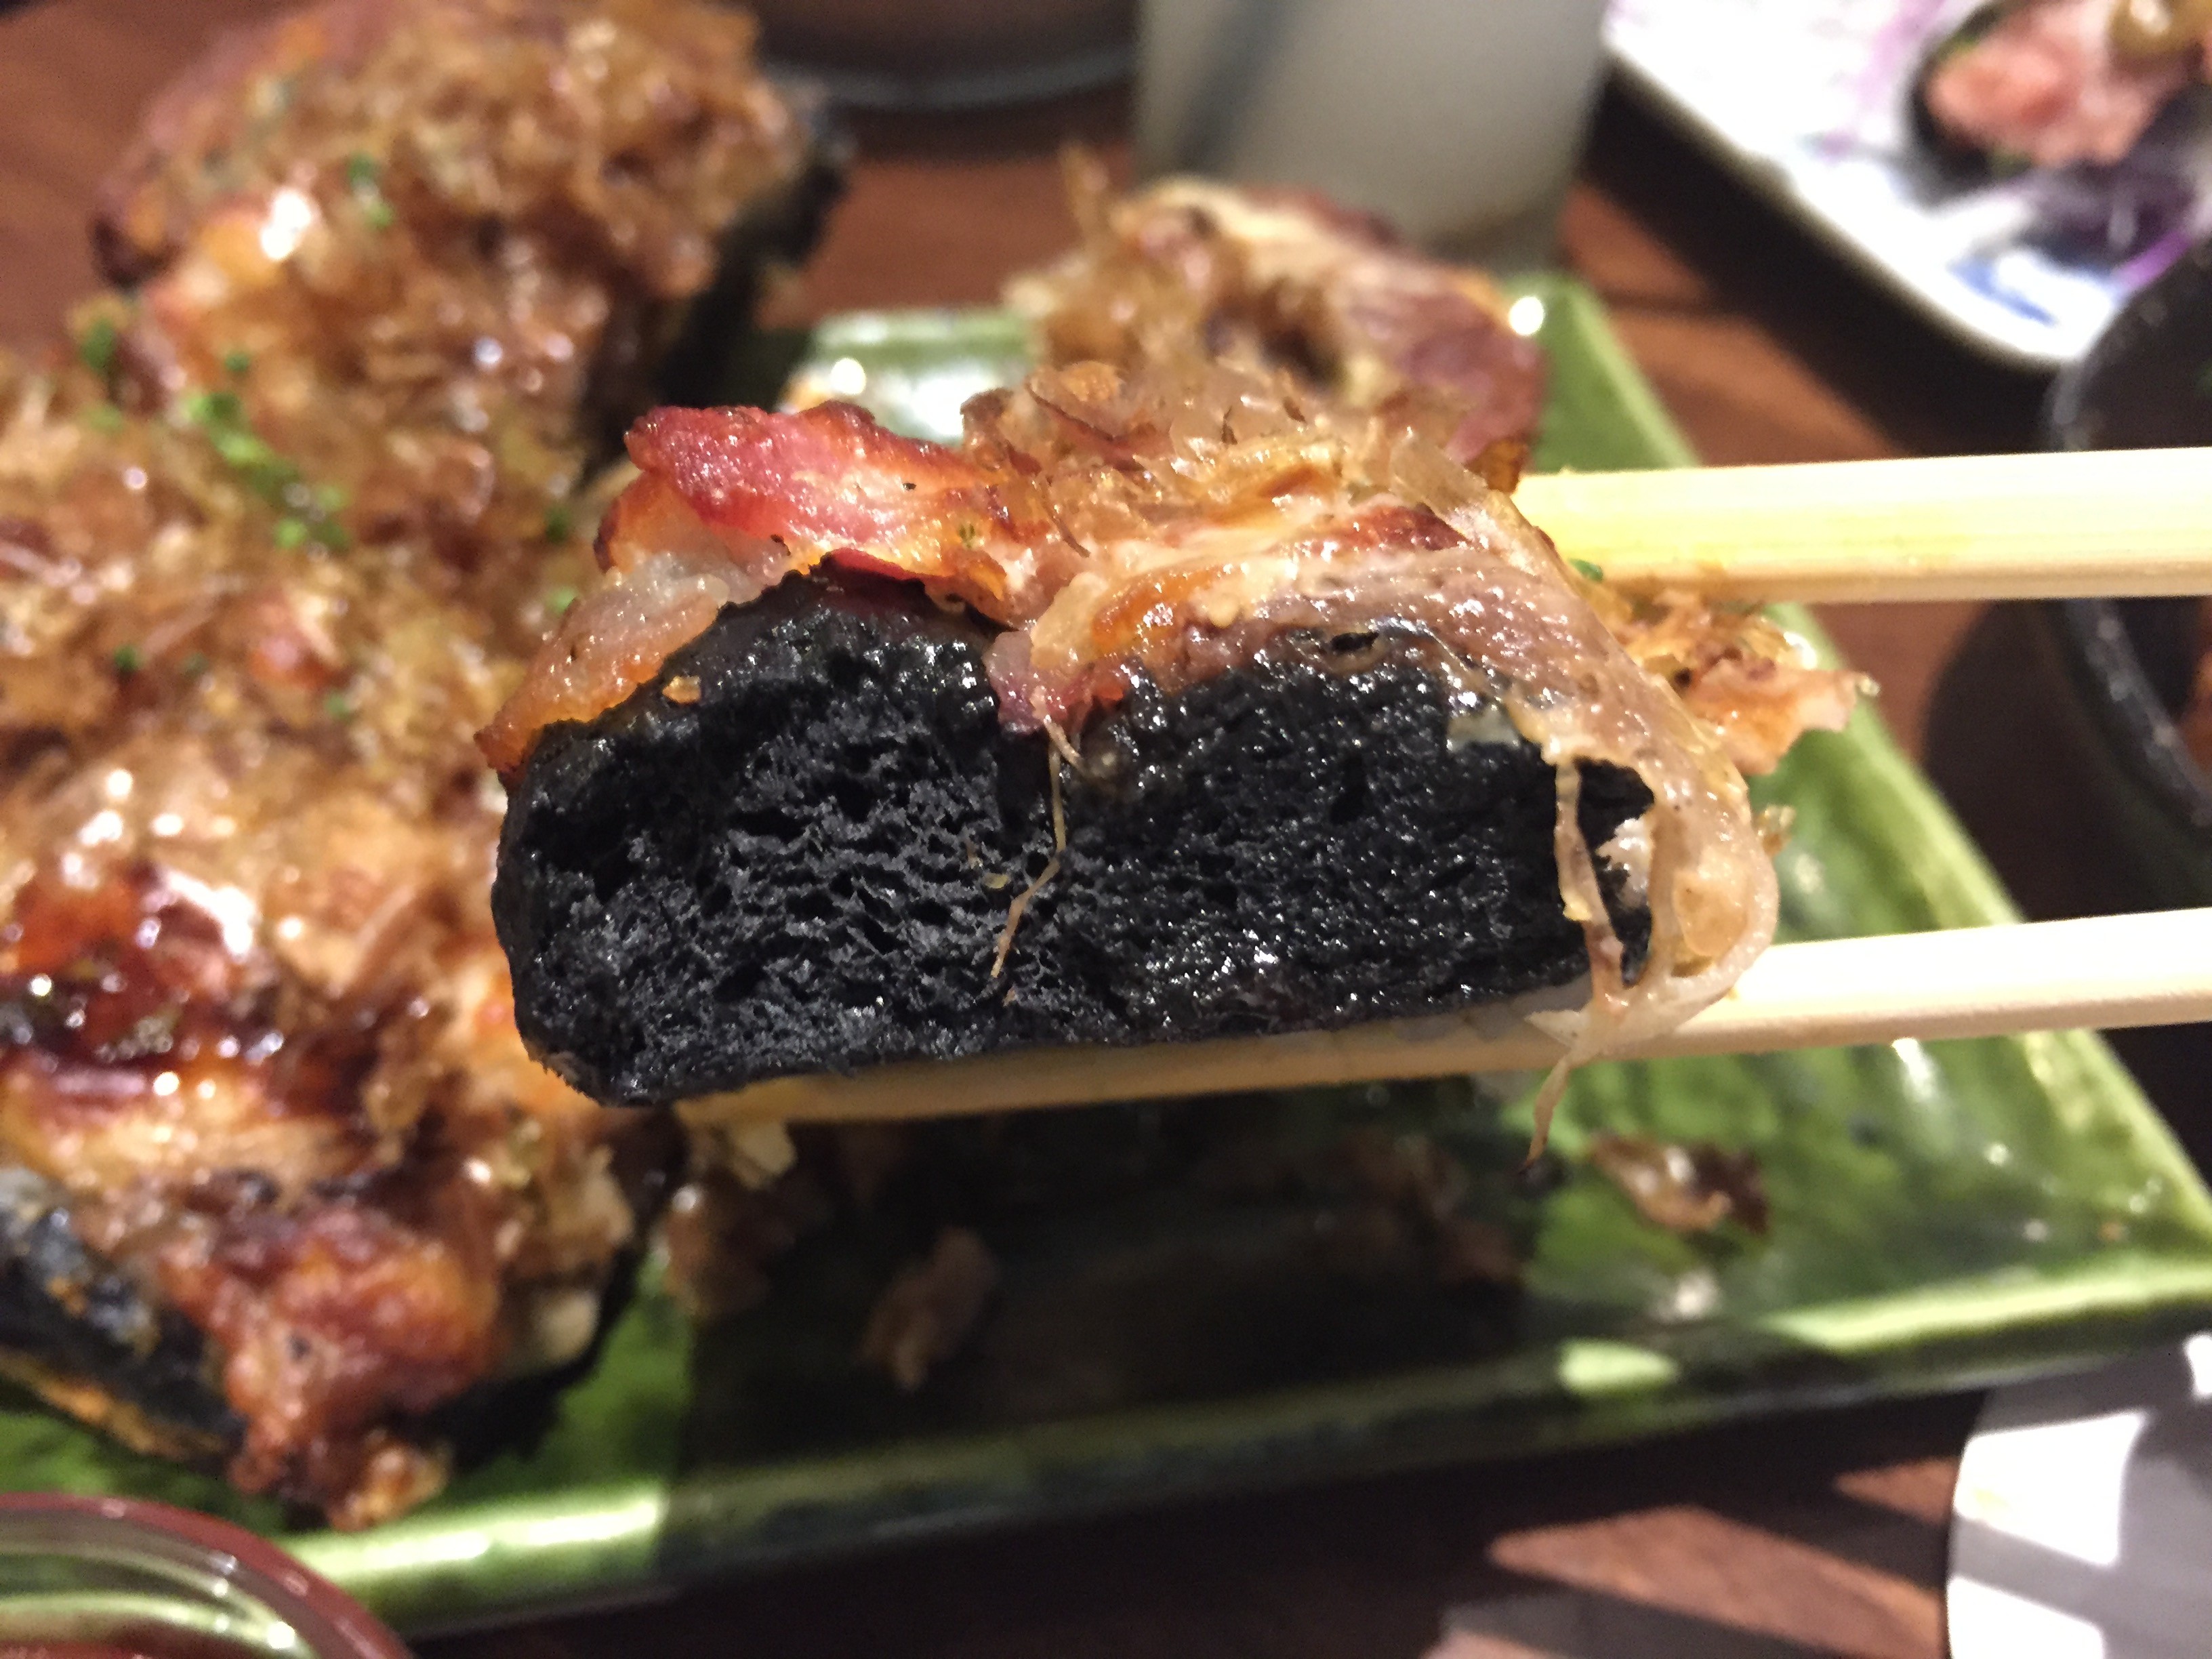 The Umami charcoal crust and me flaunting my chopsticks skillz